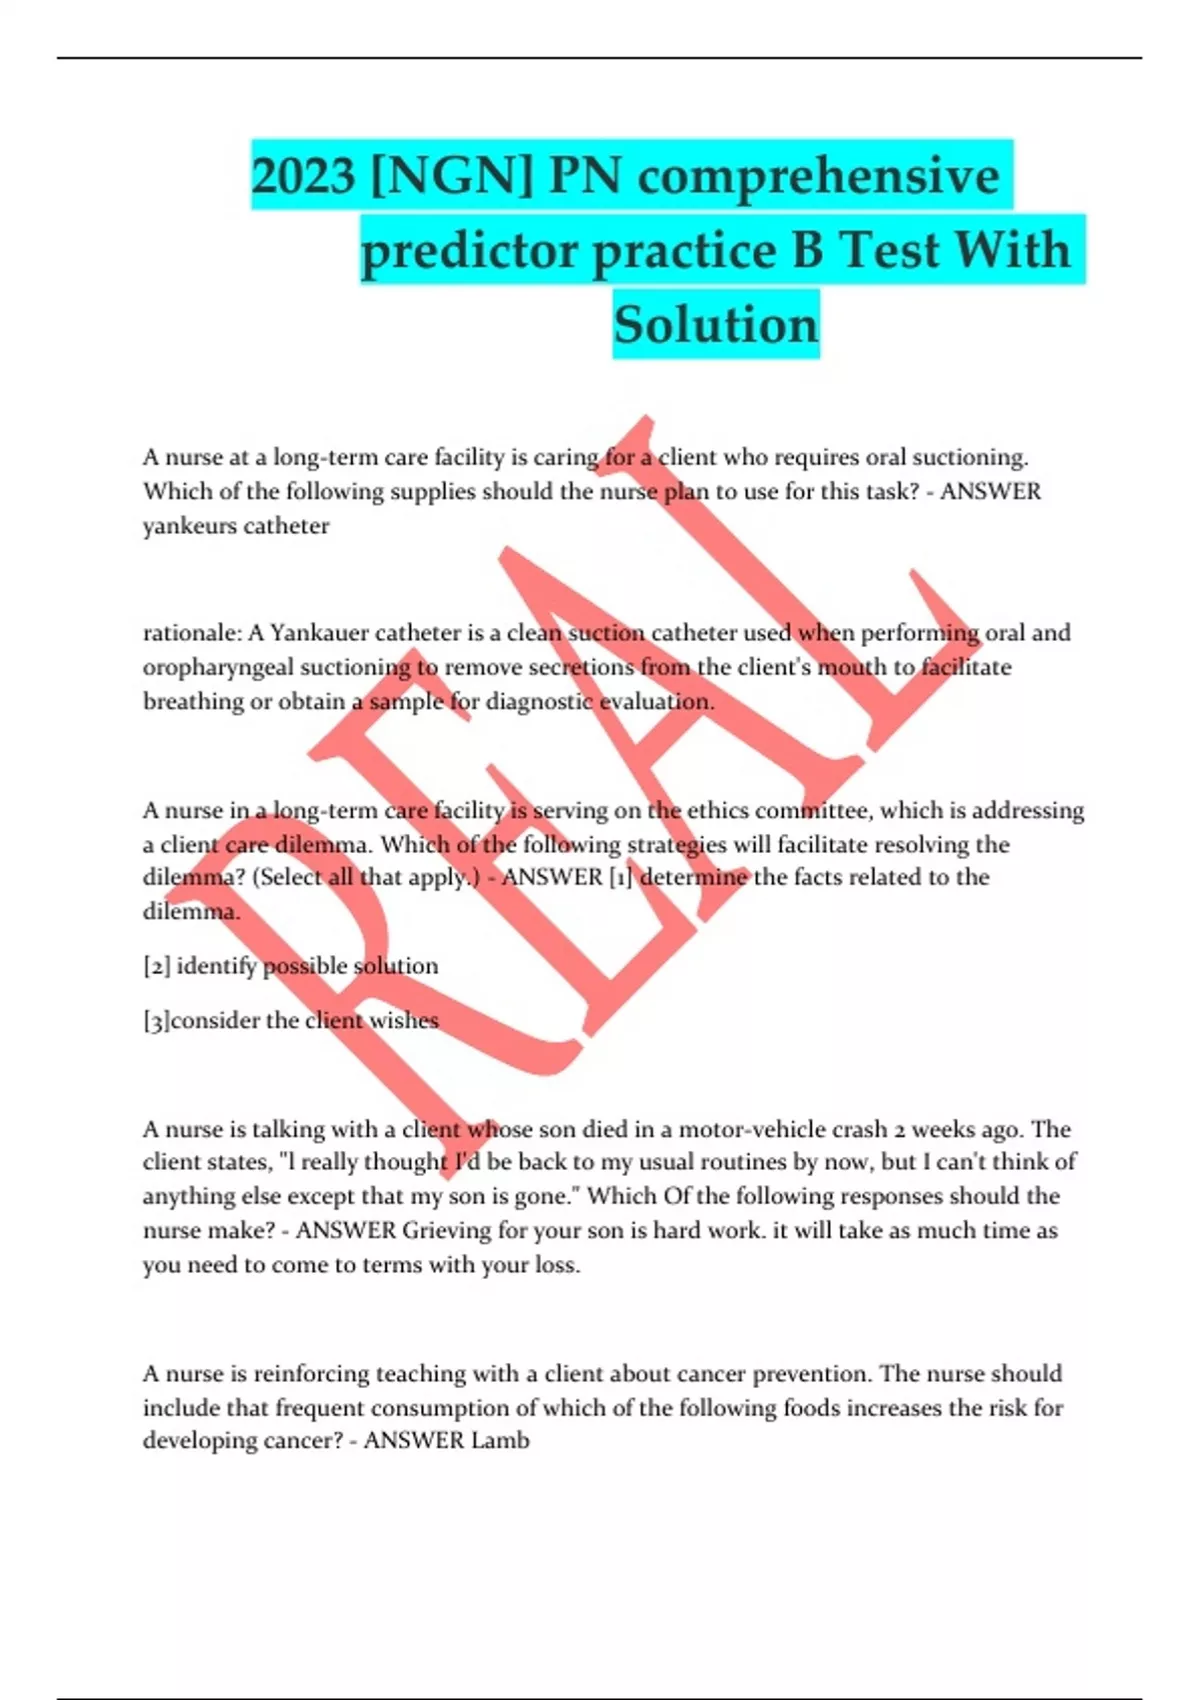 2023 [NGN] PN comprehensive predictor practice B Test With Solution